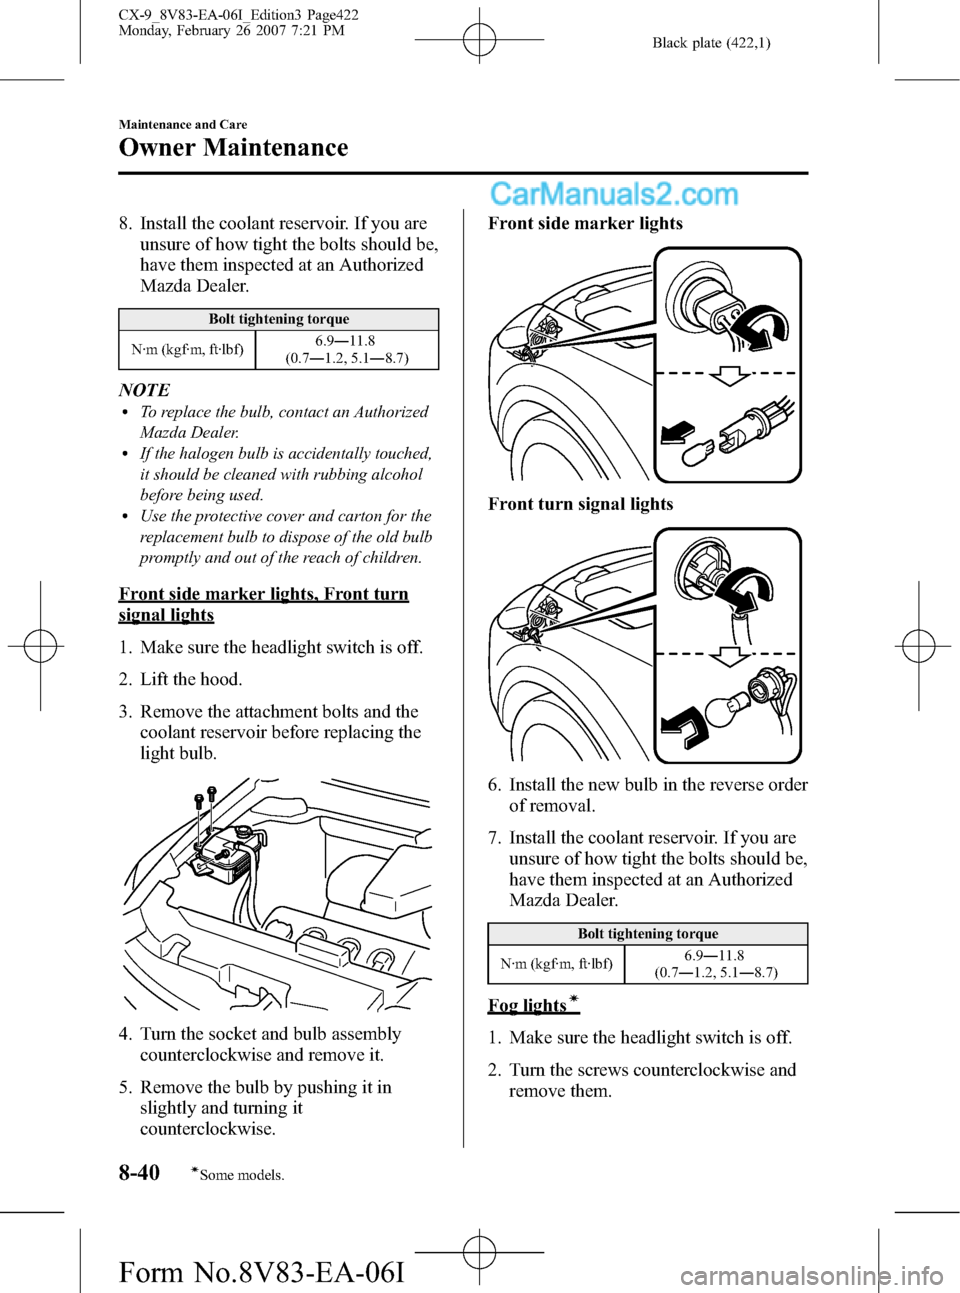 MAZDA MODEL CX-9 2007   (in English) User Guide Black plate (422,1)
8. Install the coolant reservoir. If you are
unsure of how tight the bolts should be,
have them inspected at an Authorized
Mazda Dealer.
Bolt tightening torque
N·m (kgf·m, ft·lb